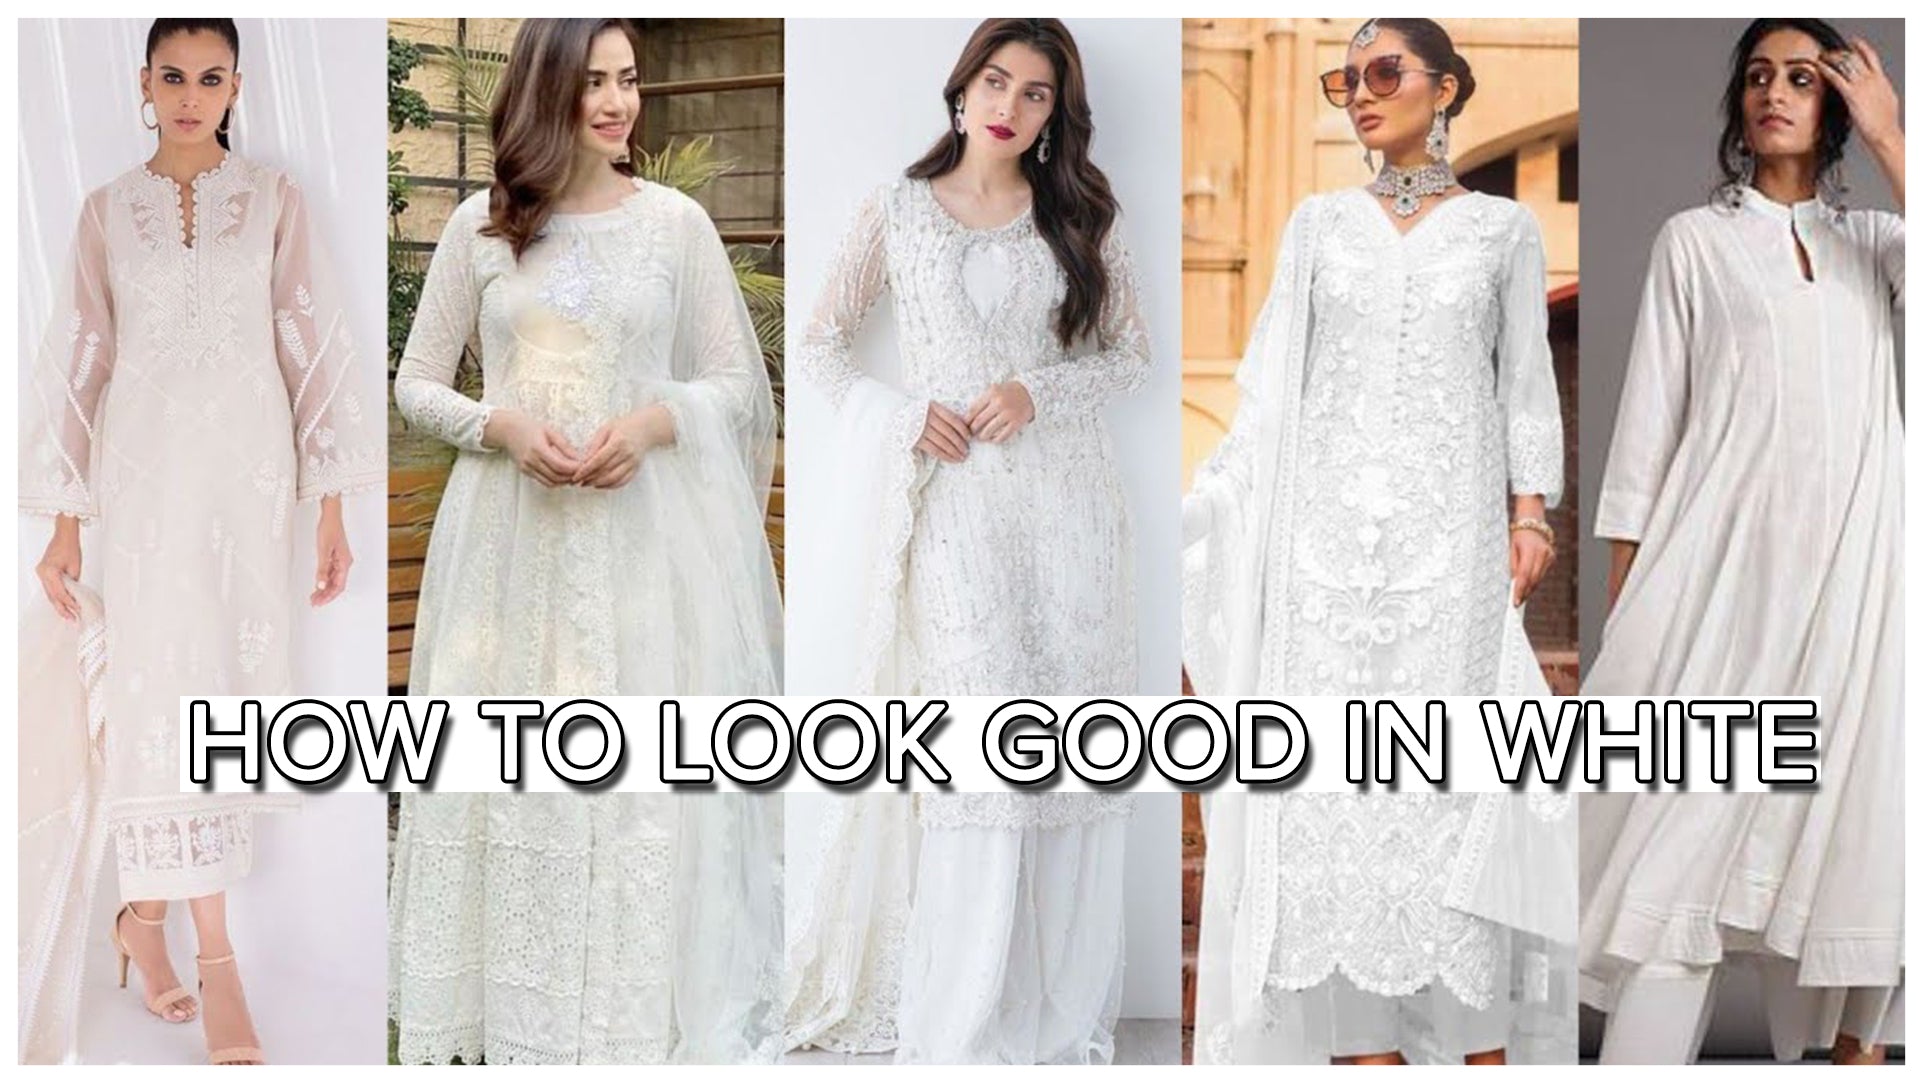 How to look good in white